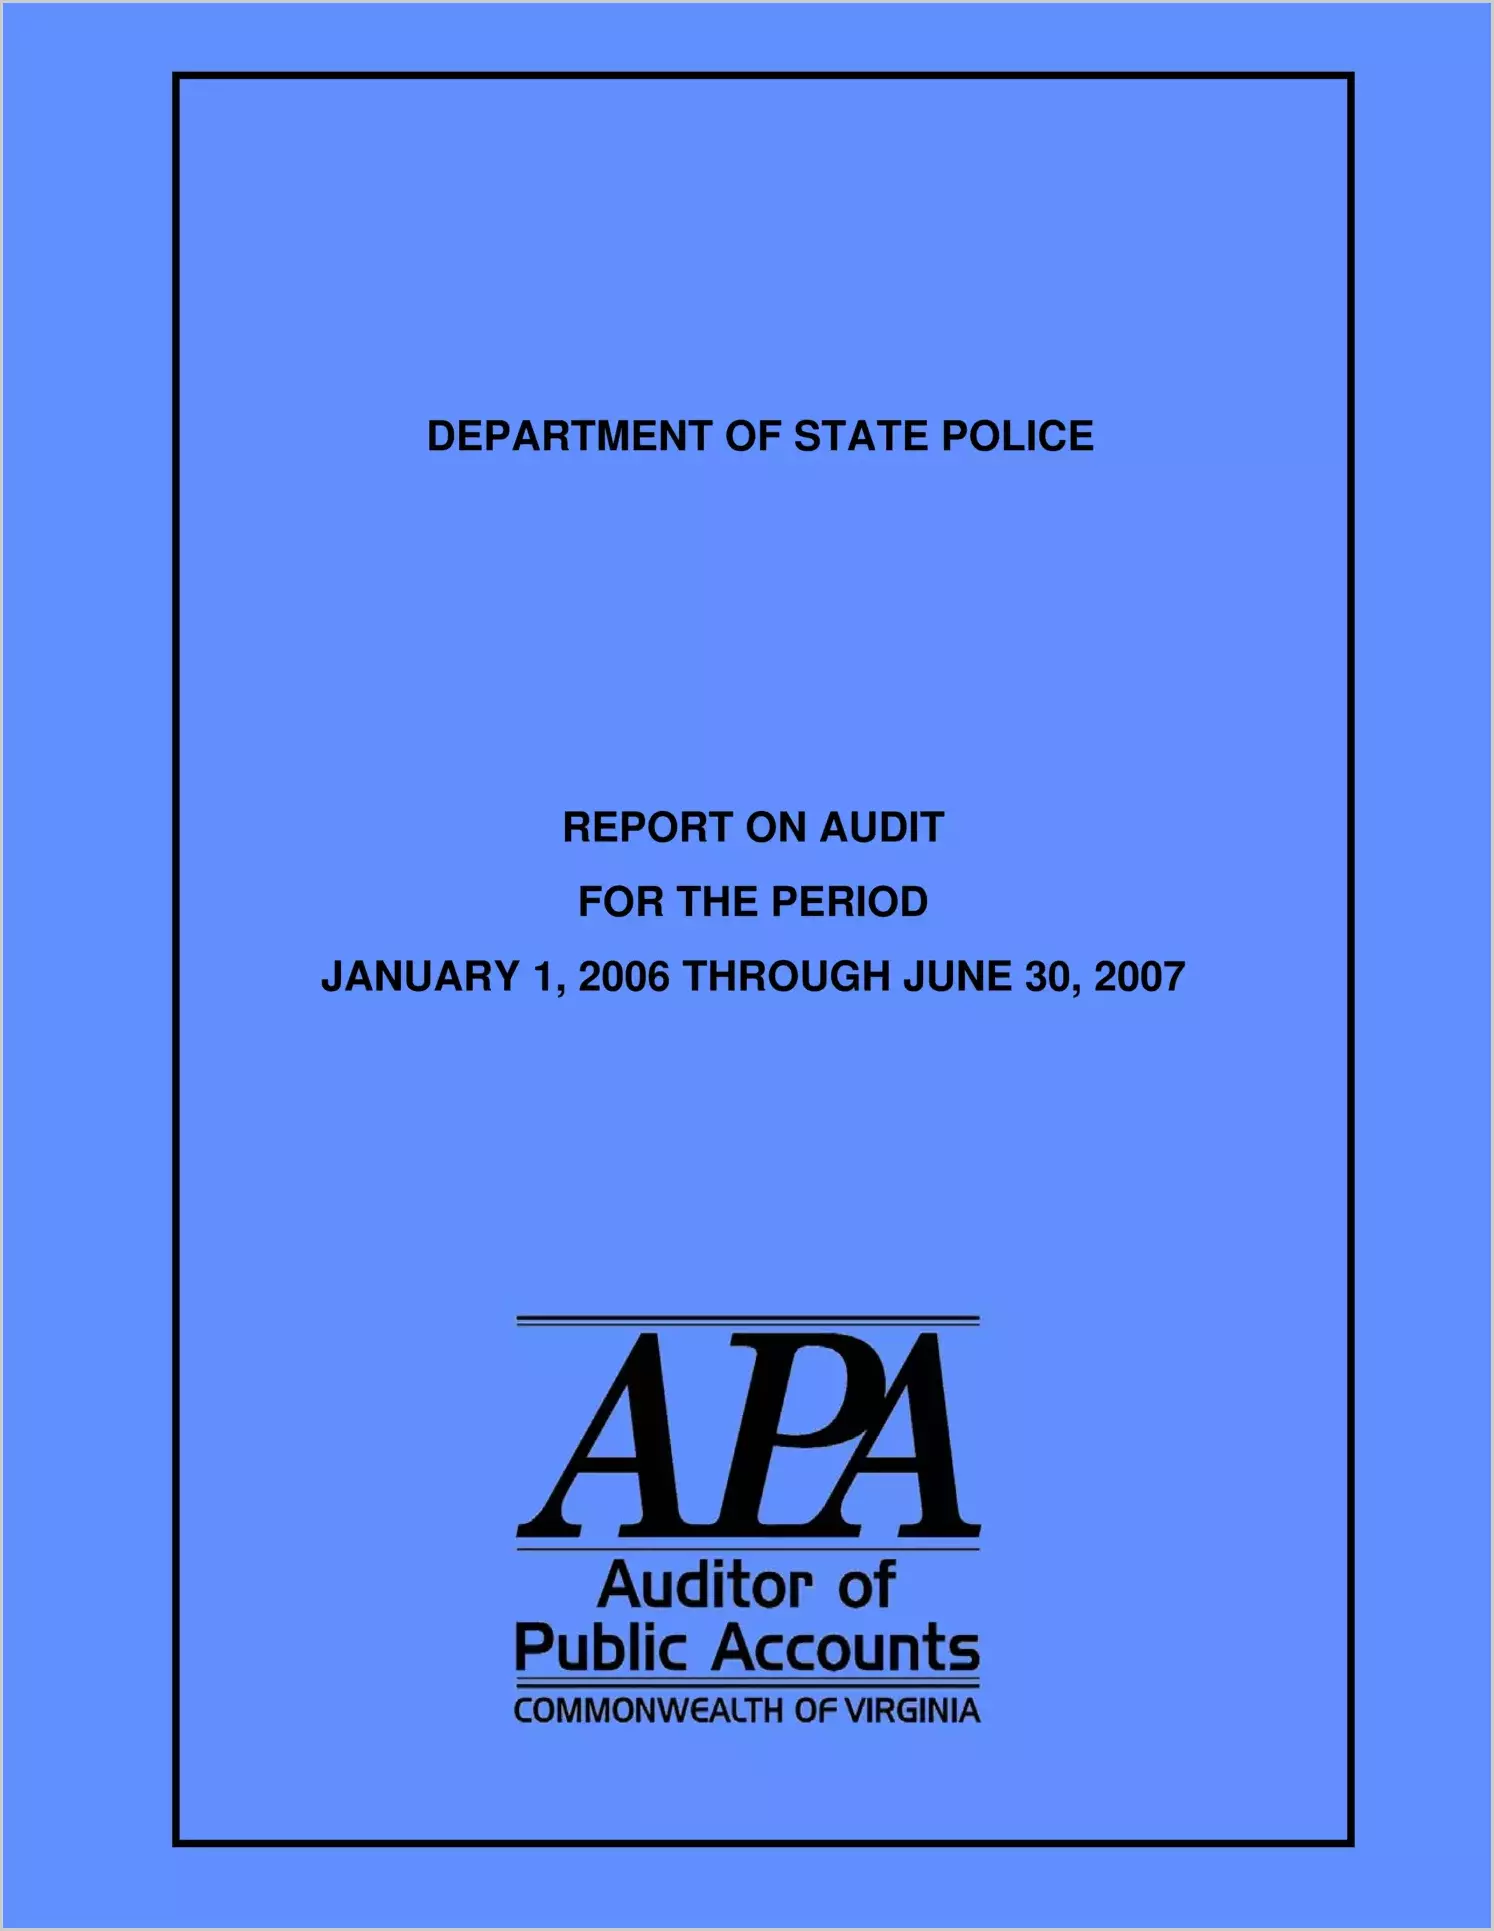 Department of State Police for the period January 1, 2006 through June 30, 2007